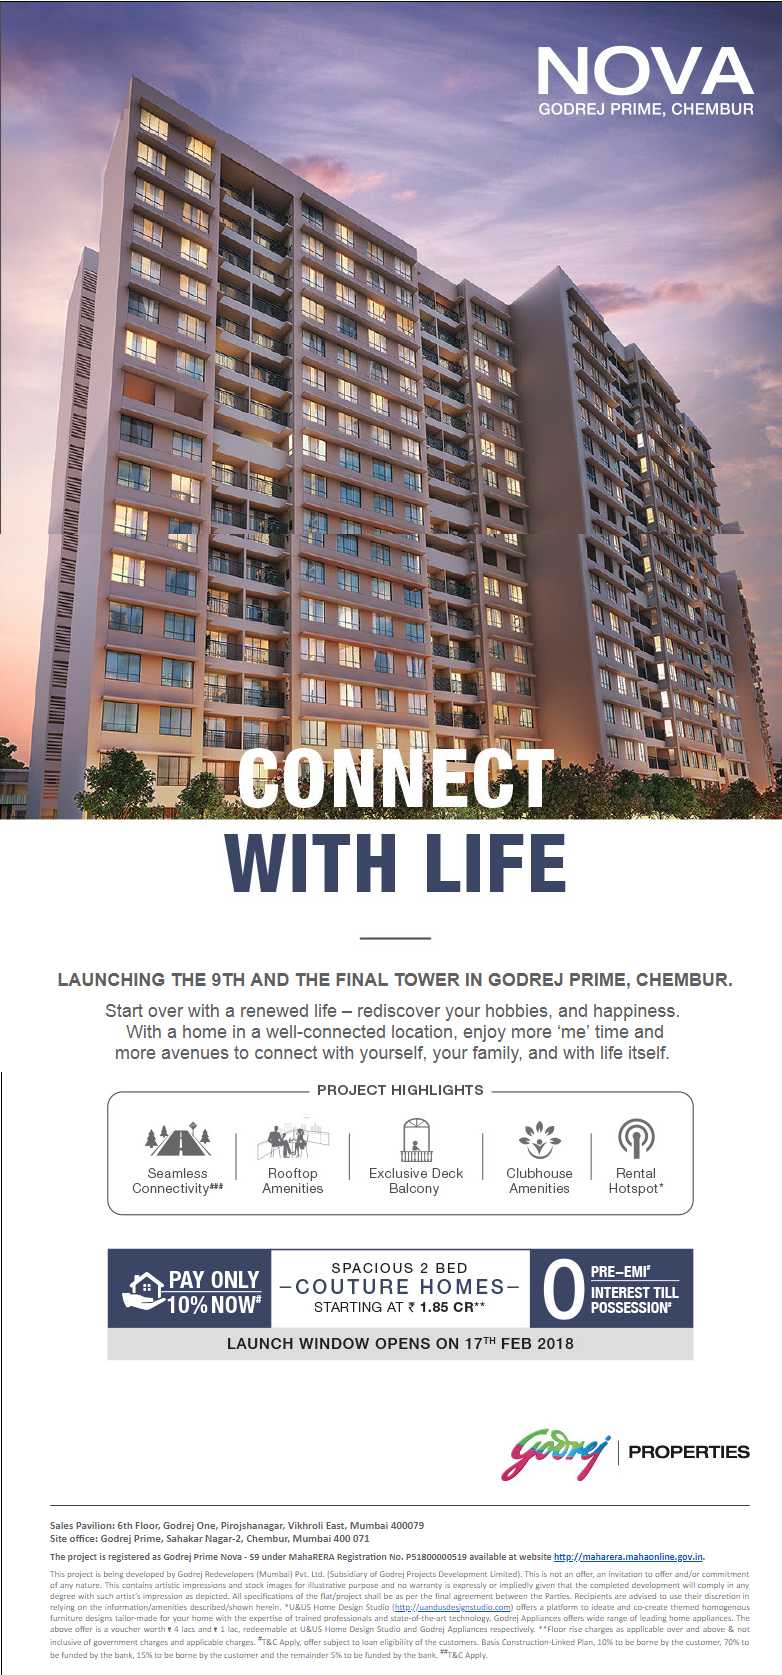 Launching the 9th and the final tower in Godrej Prime Nova, Mumbai Update